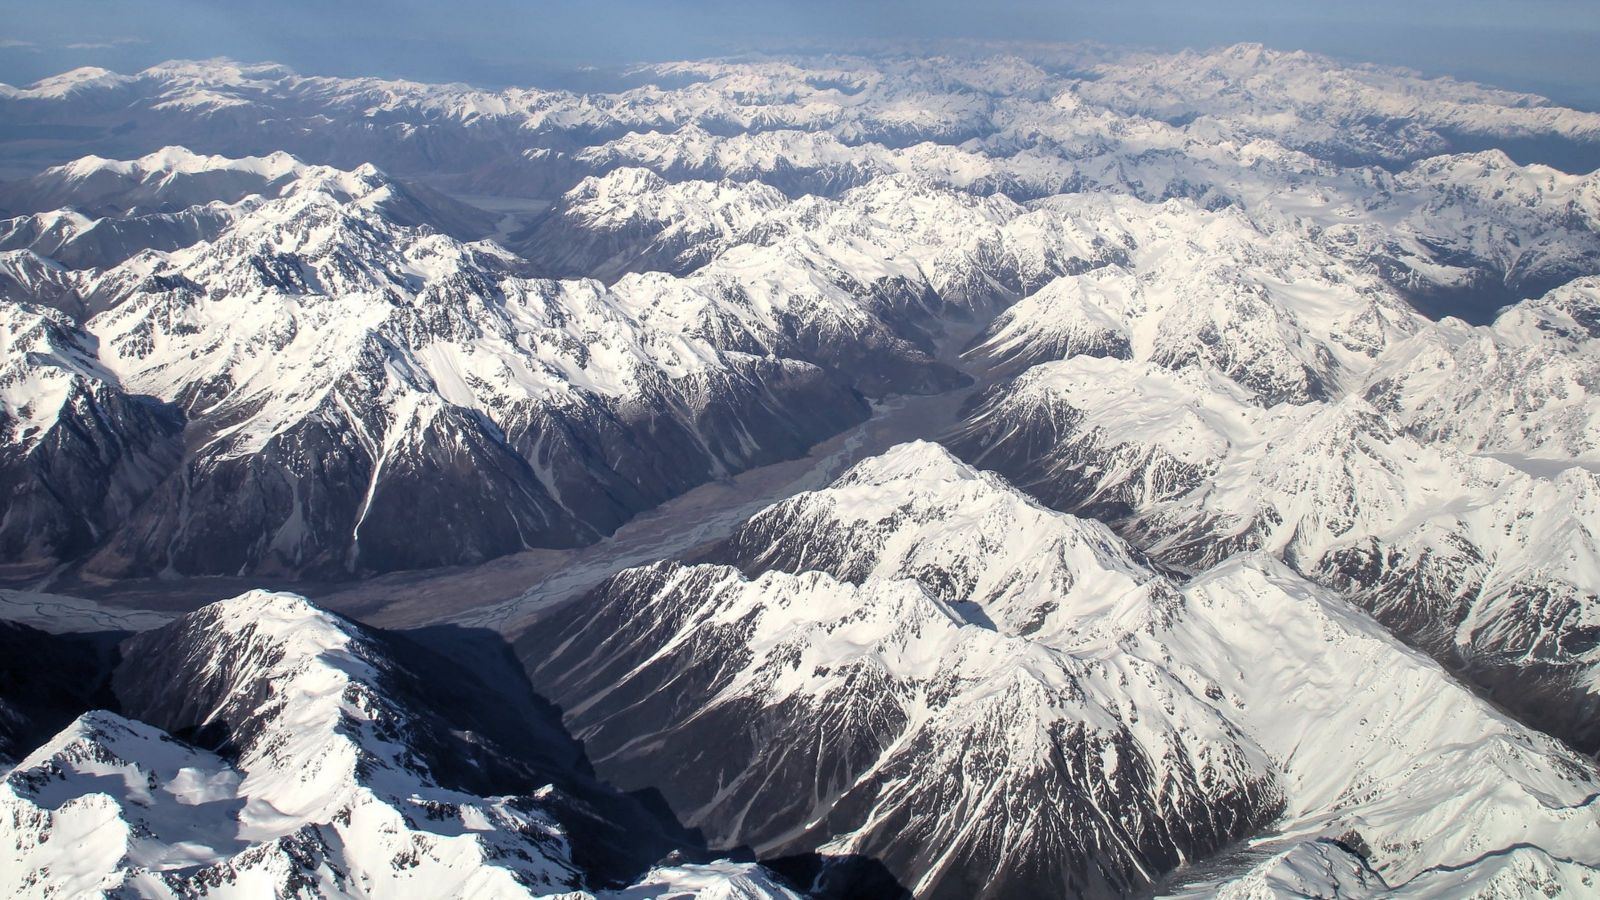 Southern alps from above, south island, NZ